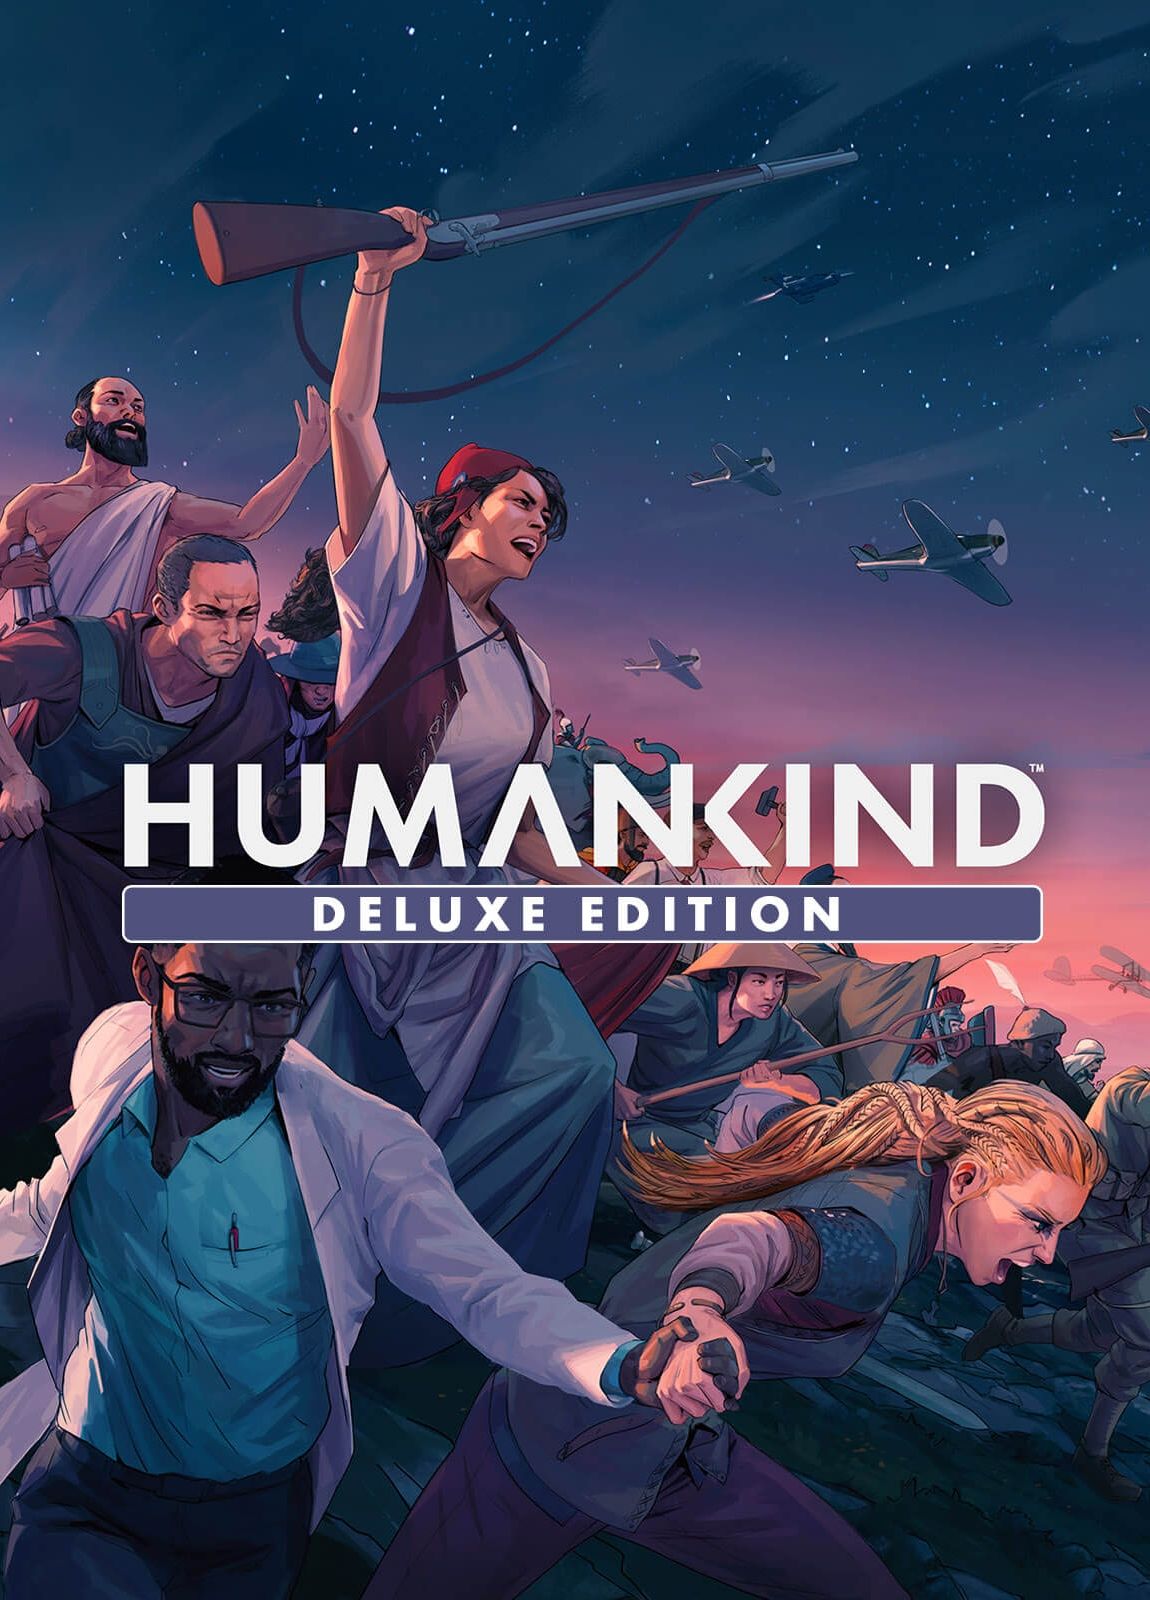 Buy HUMANKIND Digital Deluxe Edition Steam